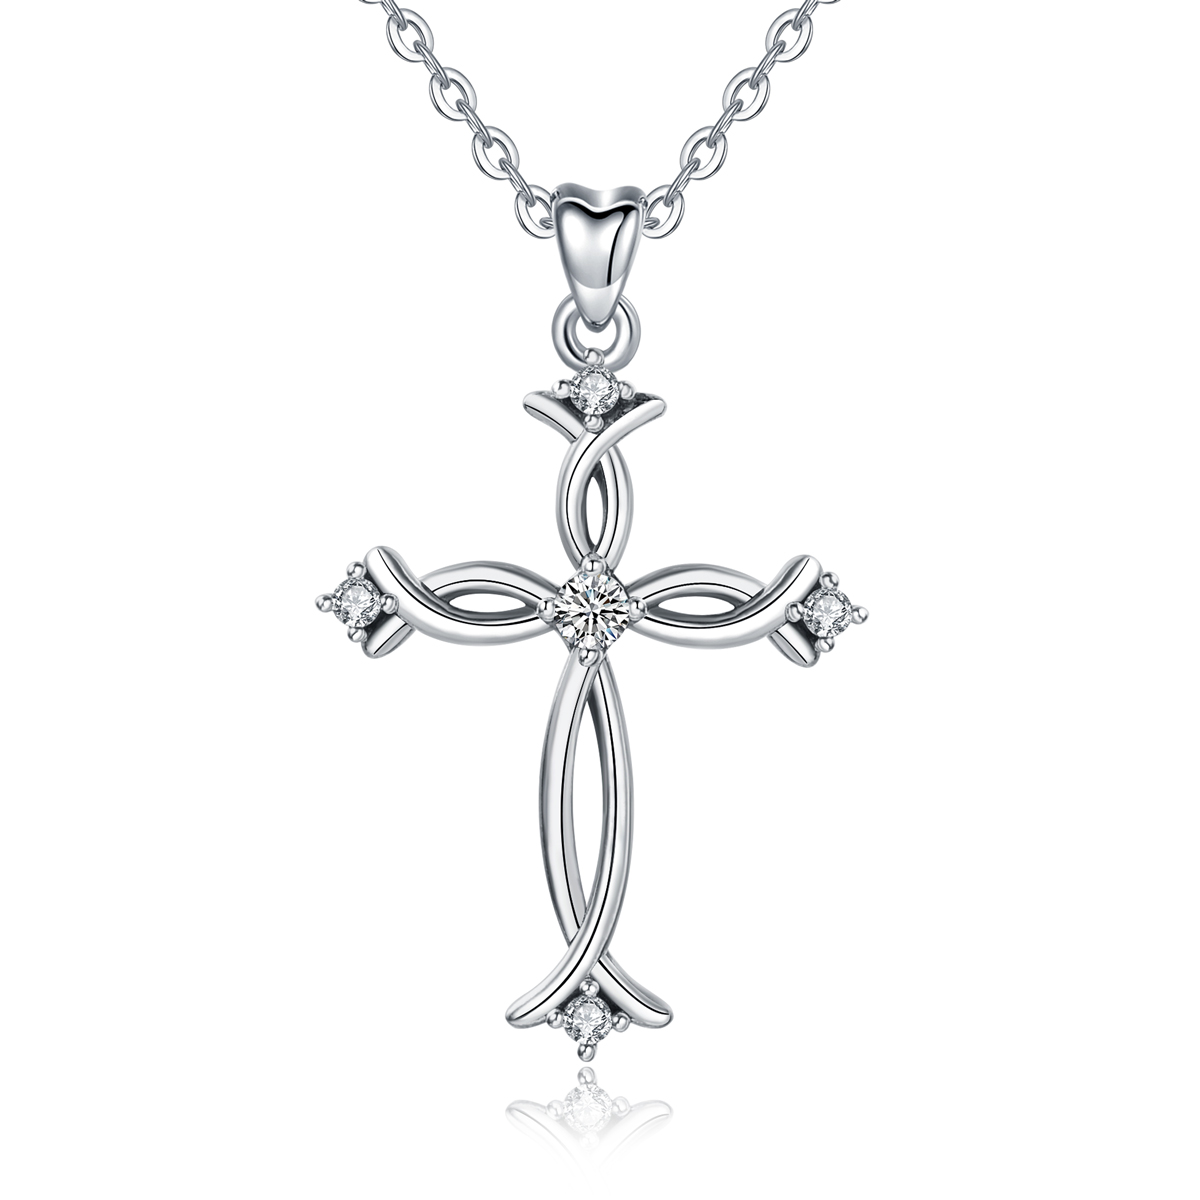 Merryshine Jewelry Wholesale Factory Price S925 Sterling Silver Cross Charm Necklace